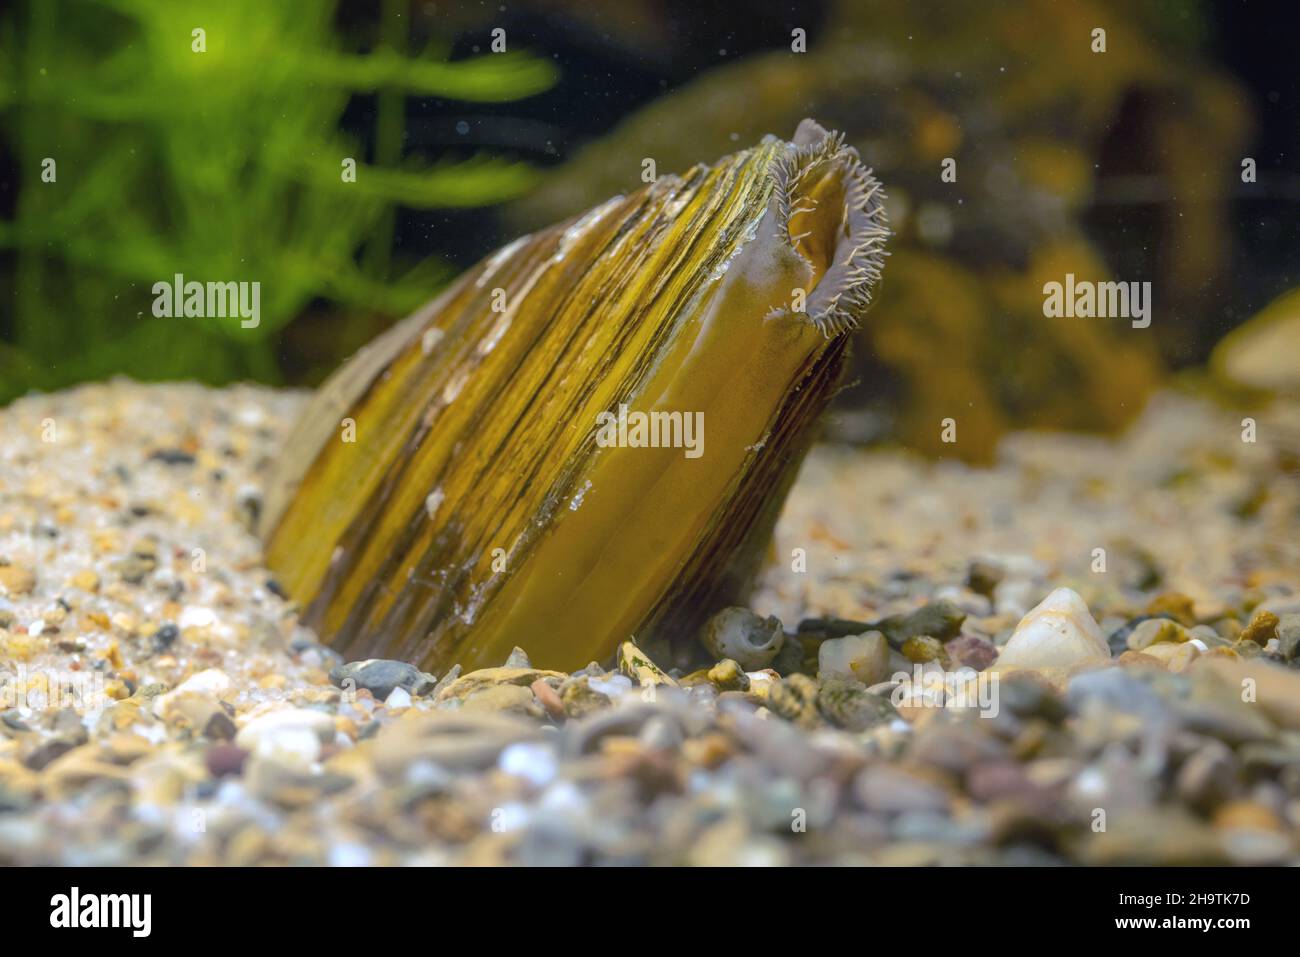 Common pond mussel, duck mussel (Anodonta anatina), partly buried with visible breathing syphon, Germany Stock Photo